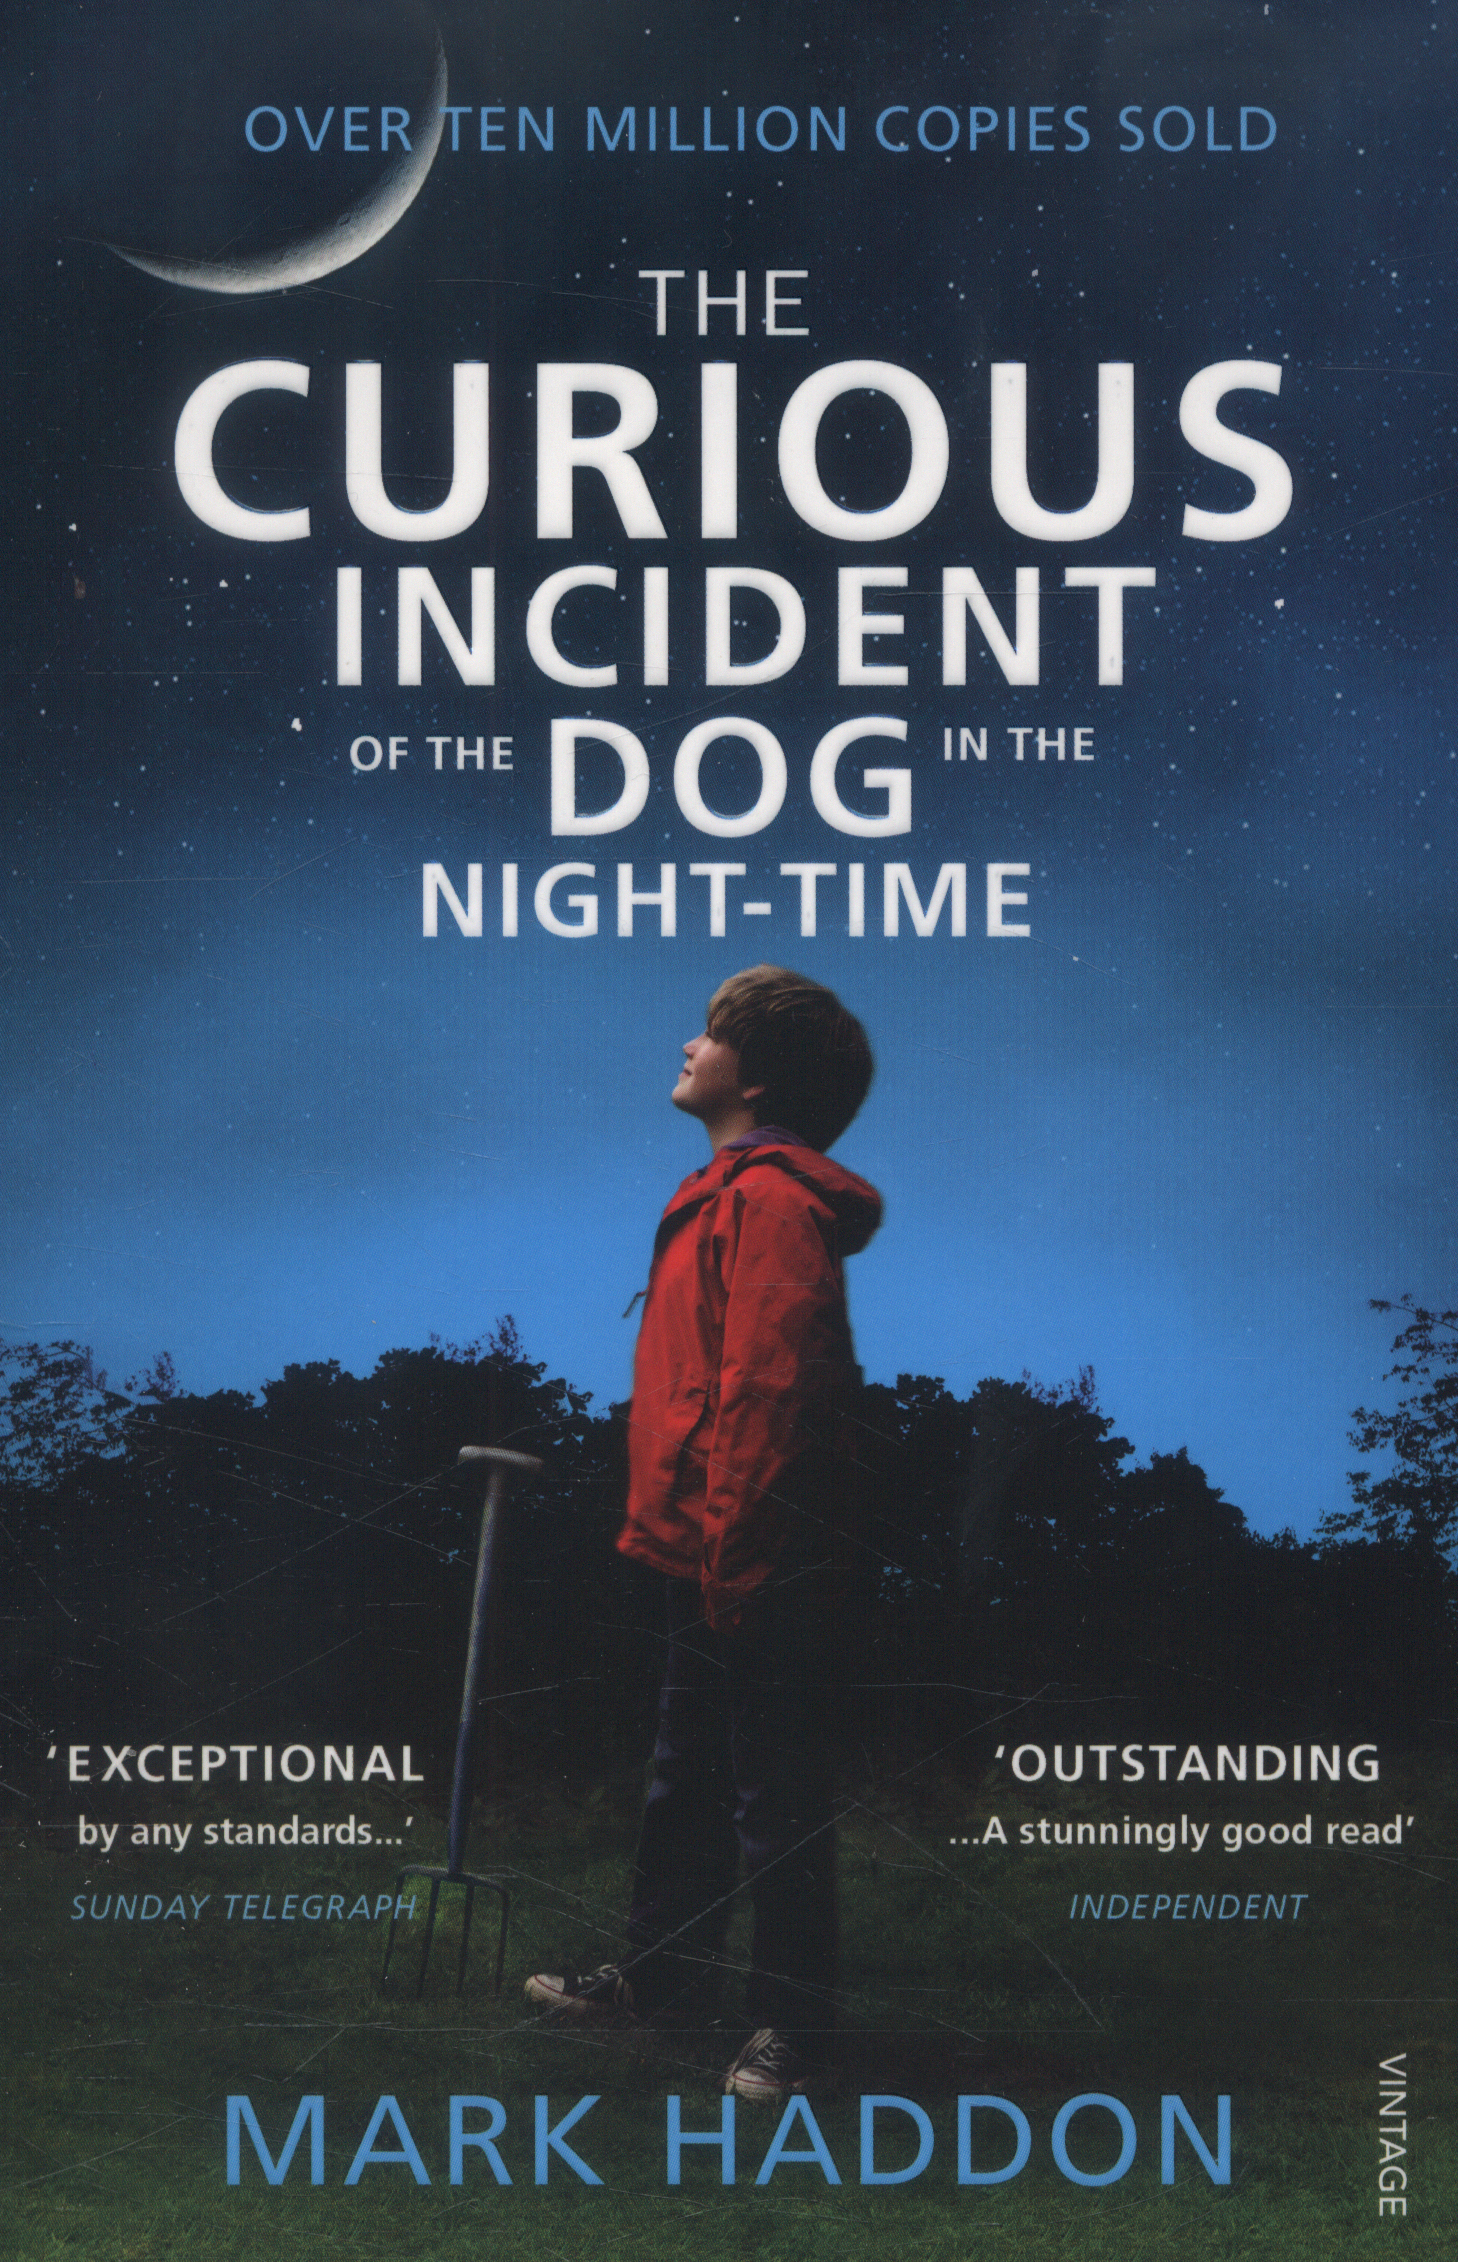 The curious incident of the dog in the night-time by Haddon, Mark